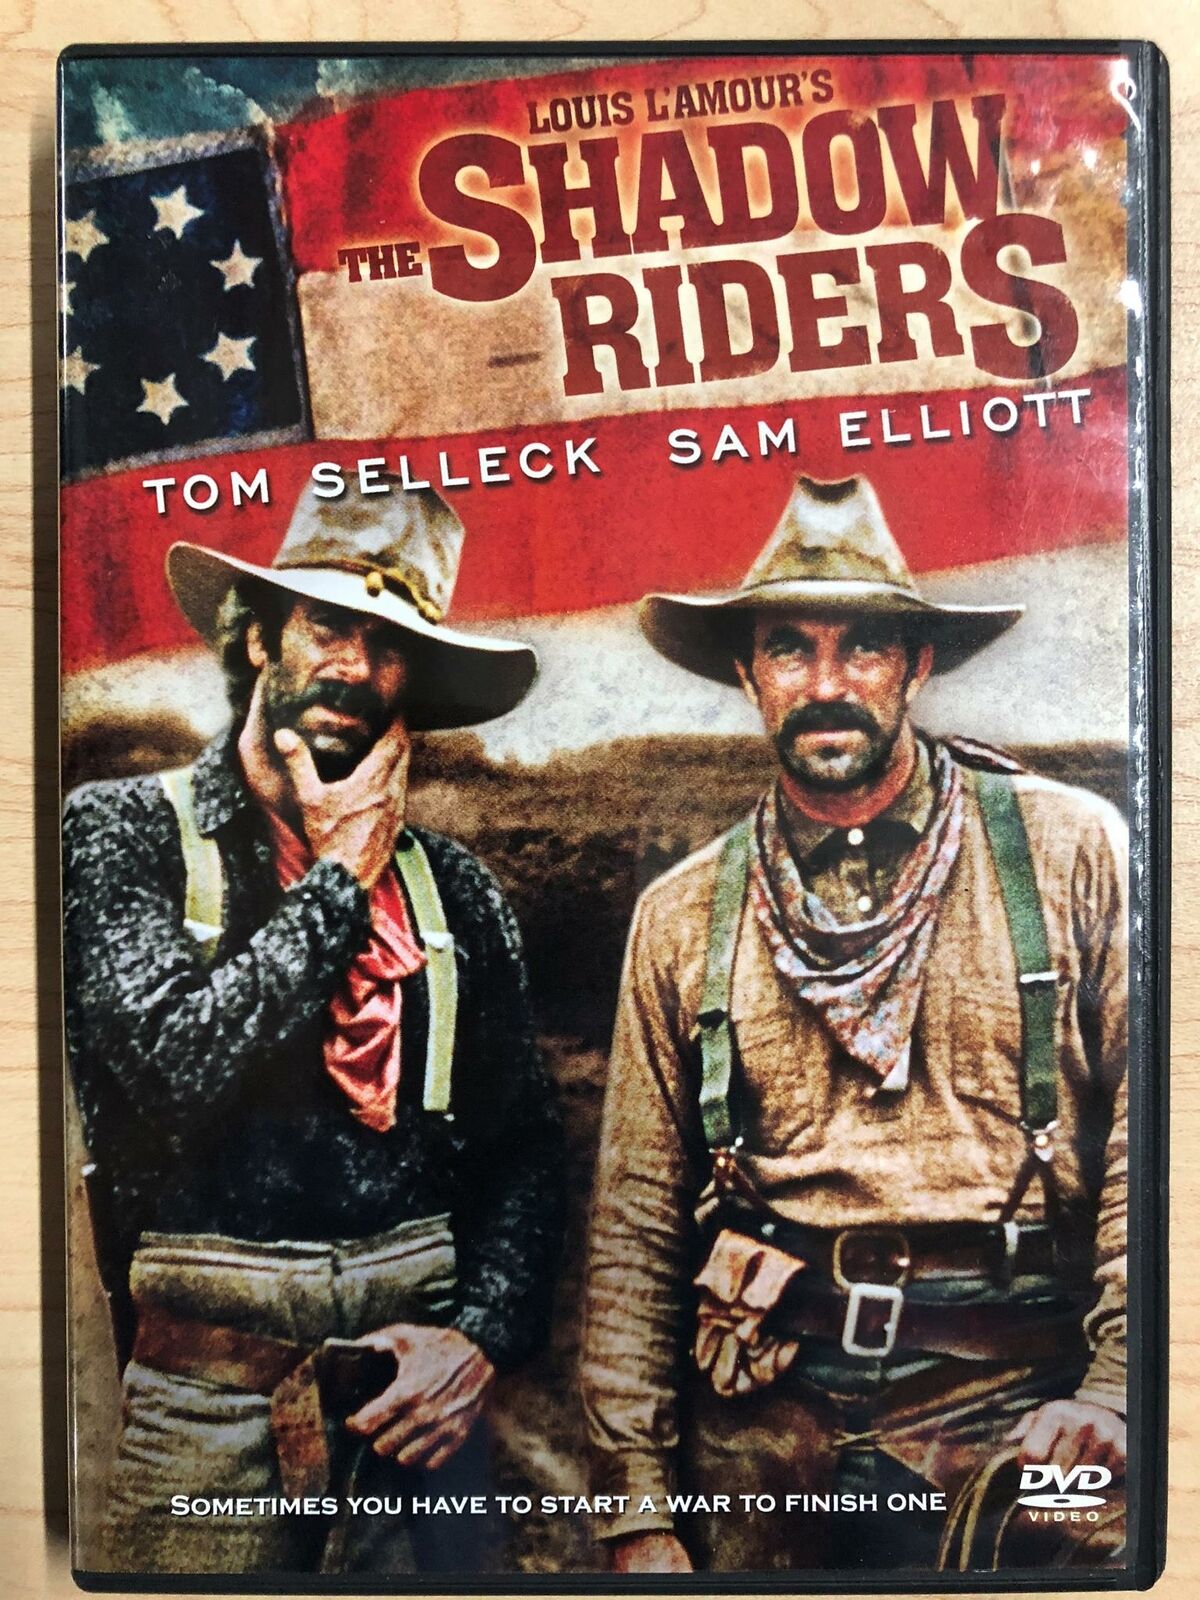 The Shadow Riders (DVD, 1982, Louis LAmour) - J0319